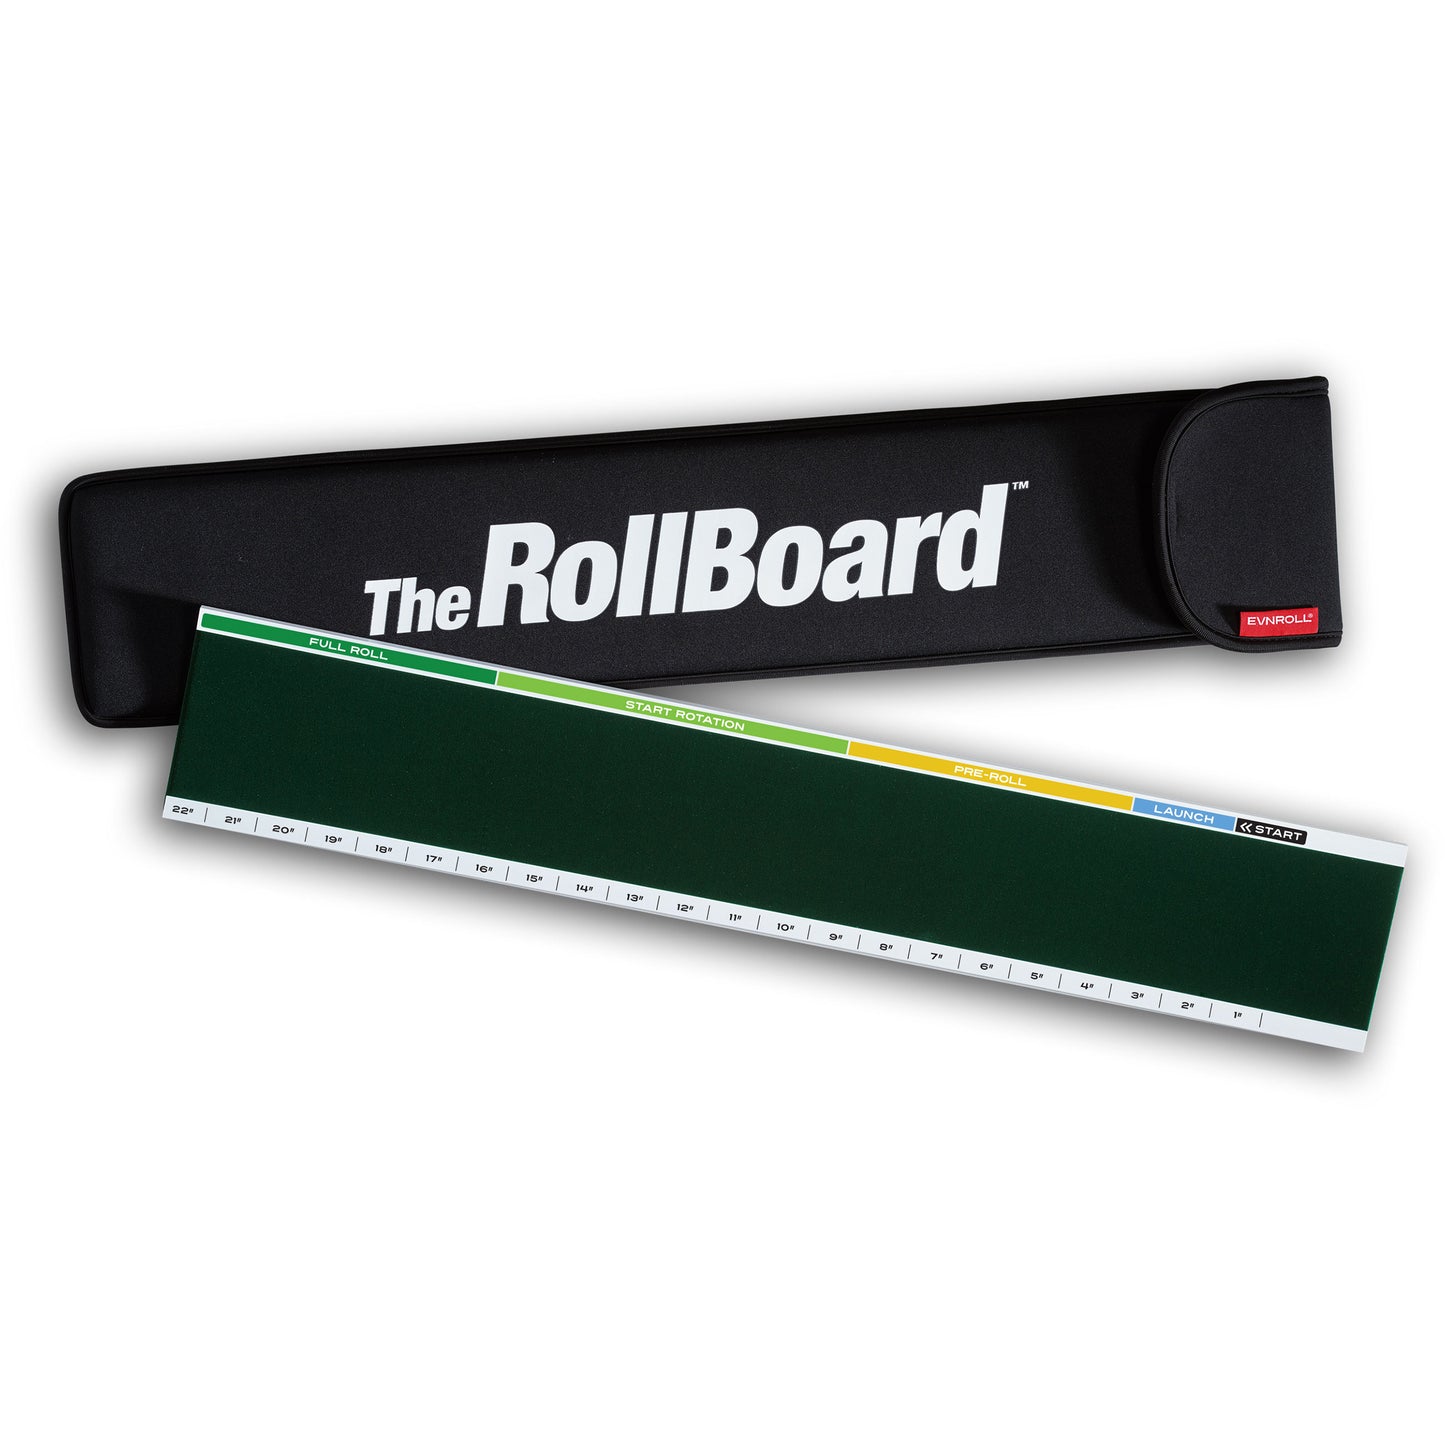 The RollBoard